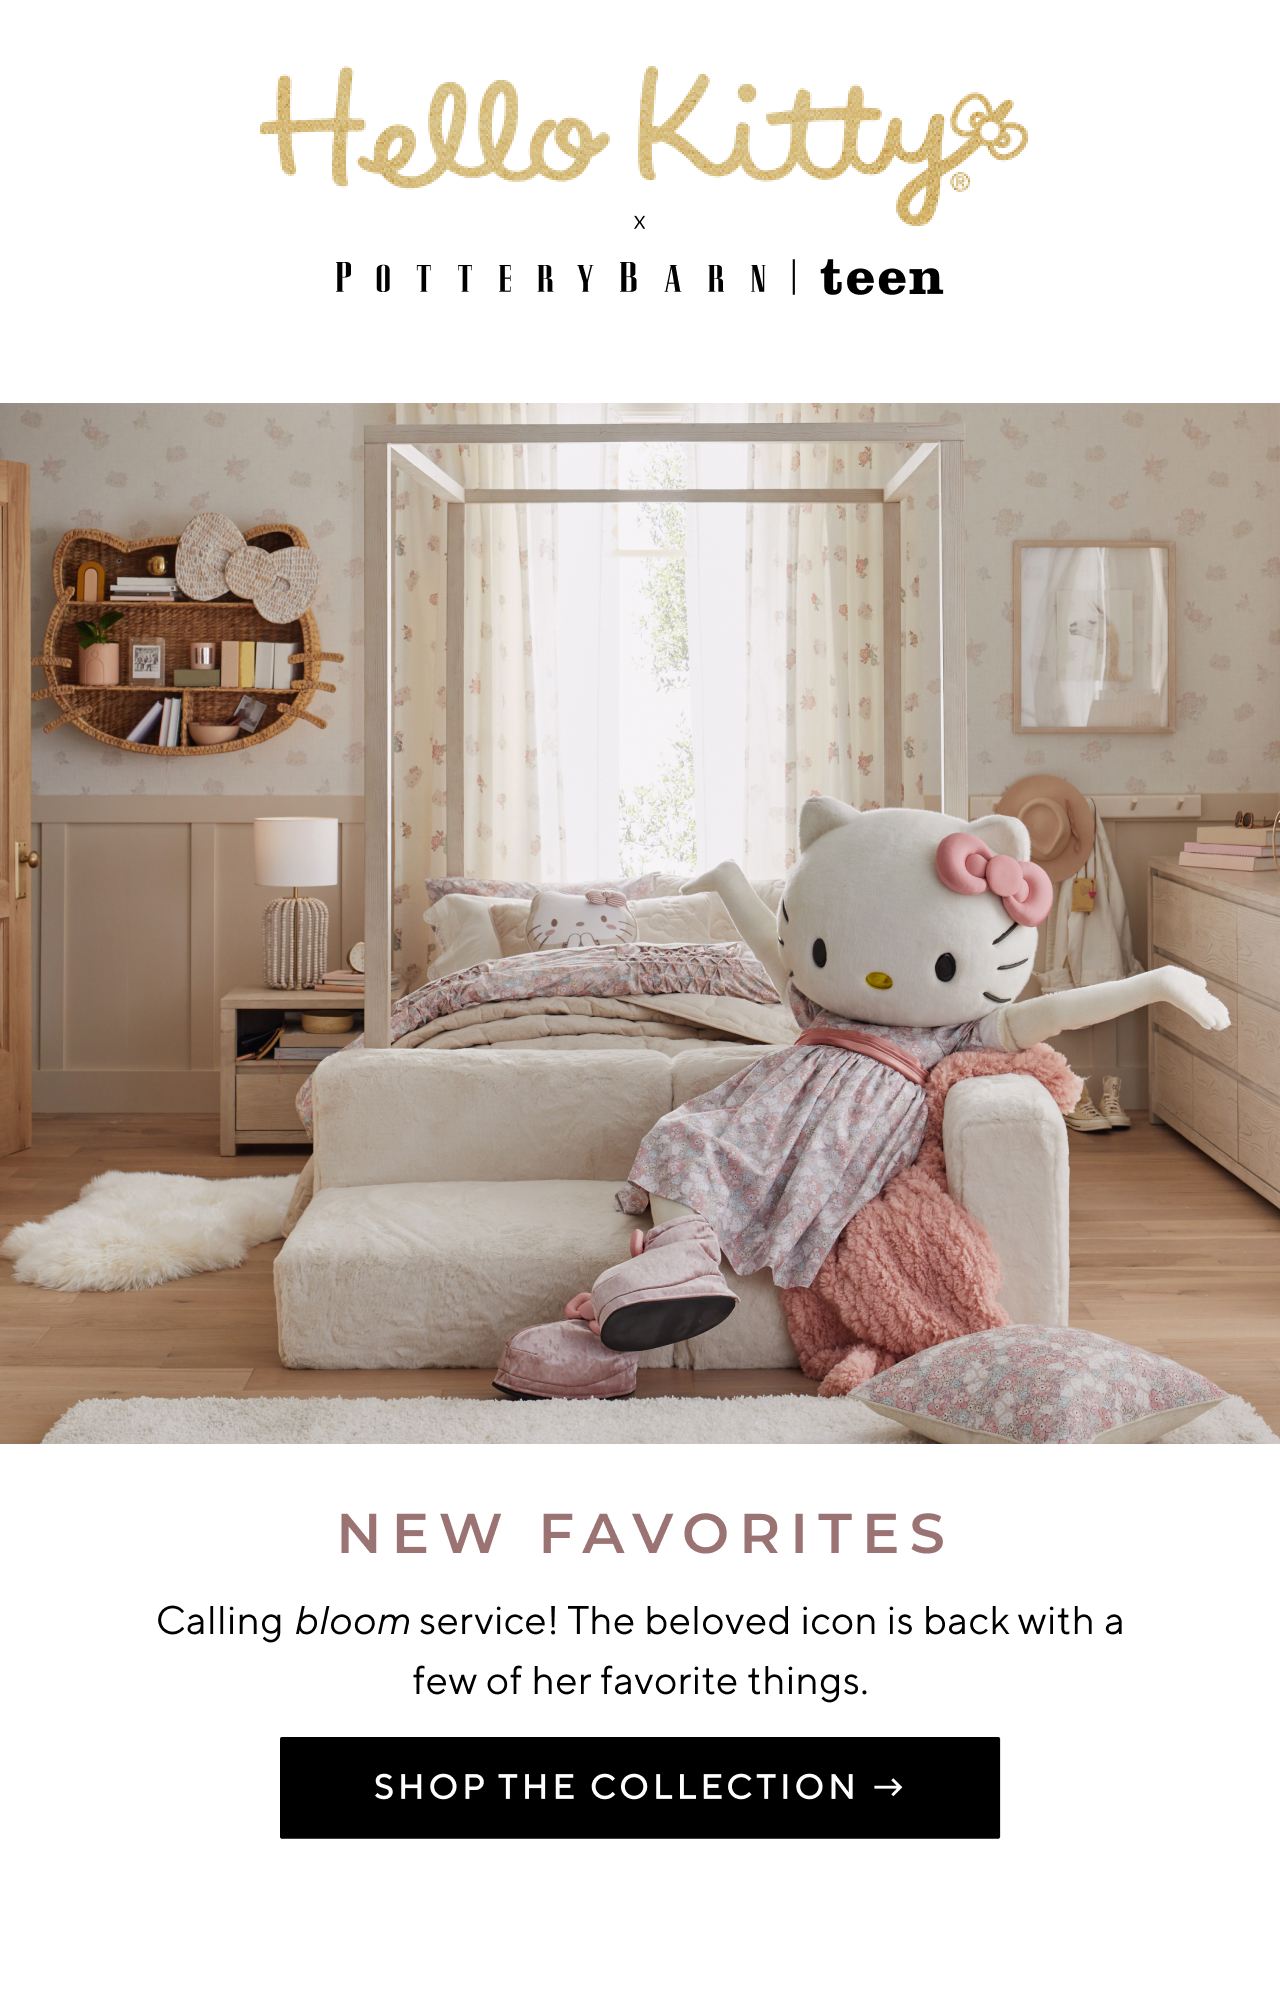 Hello Kitty x Pottery Barn Teen. New favorites. Shop the collection